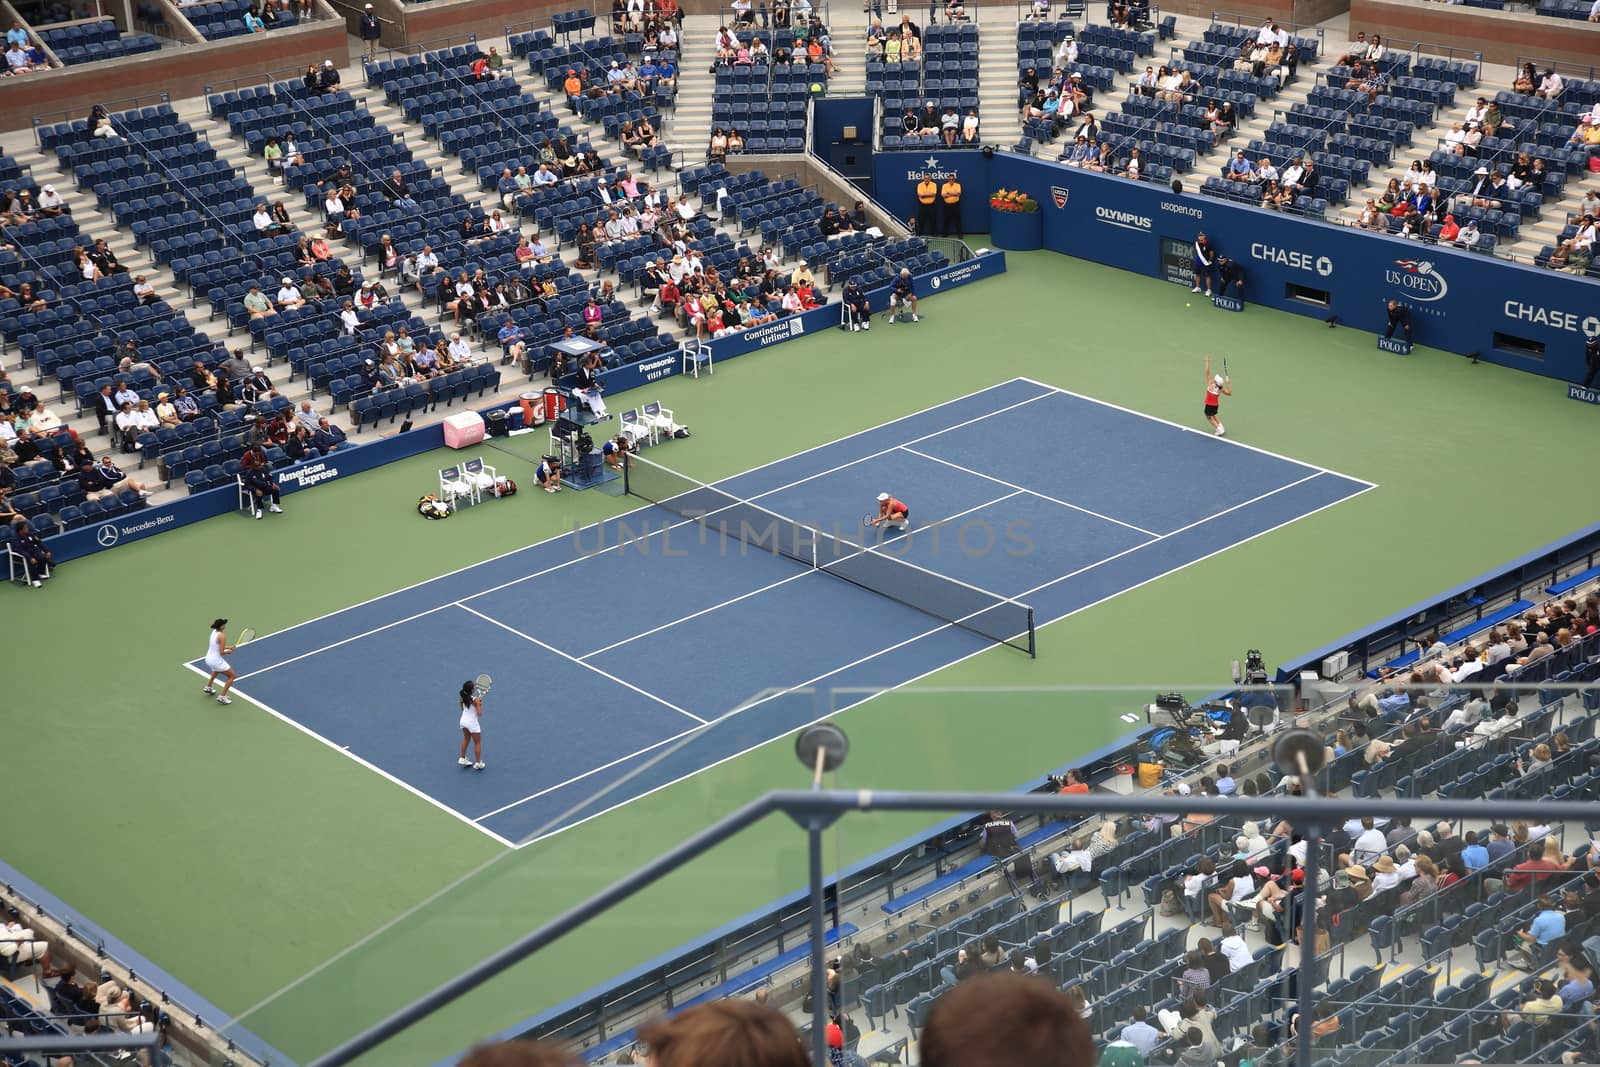 Fans and players at center court in Arthur Ashe Stadium for a U.S. Open day session tennis match.